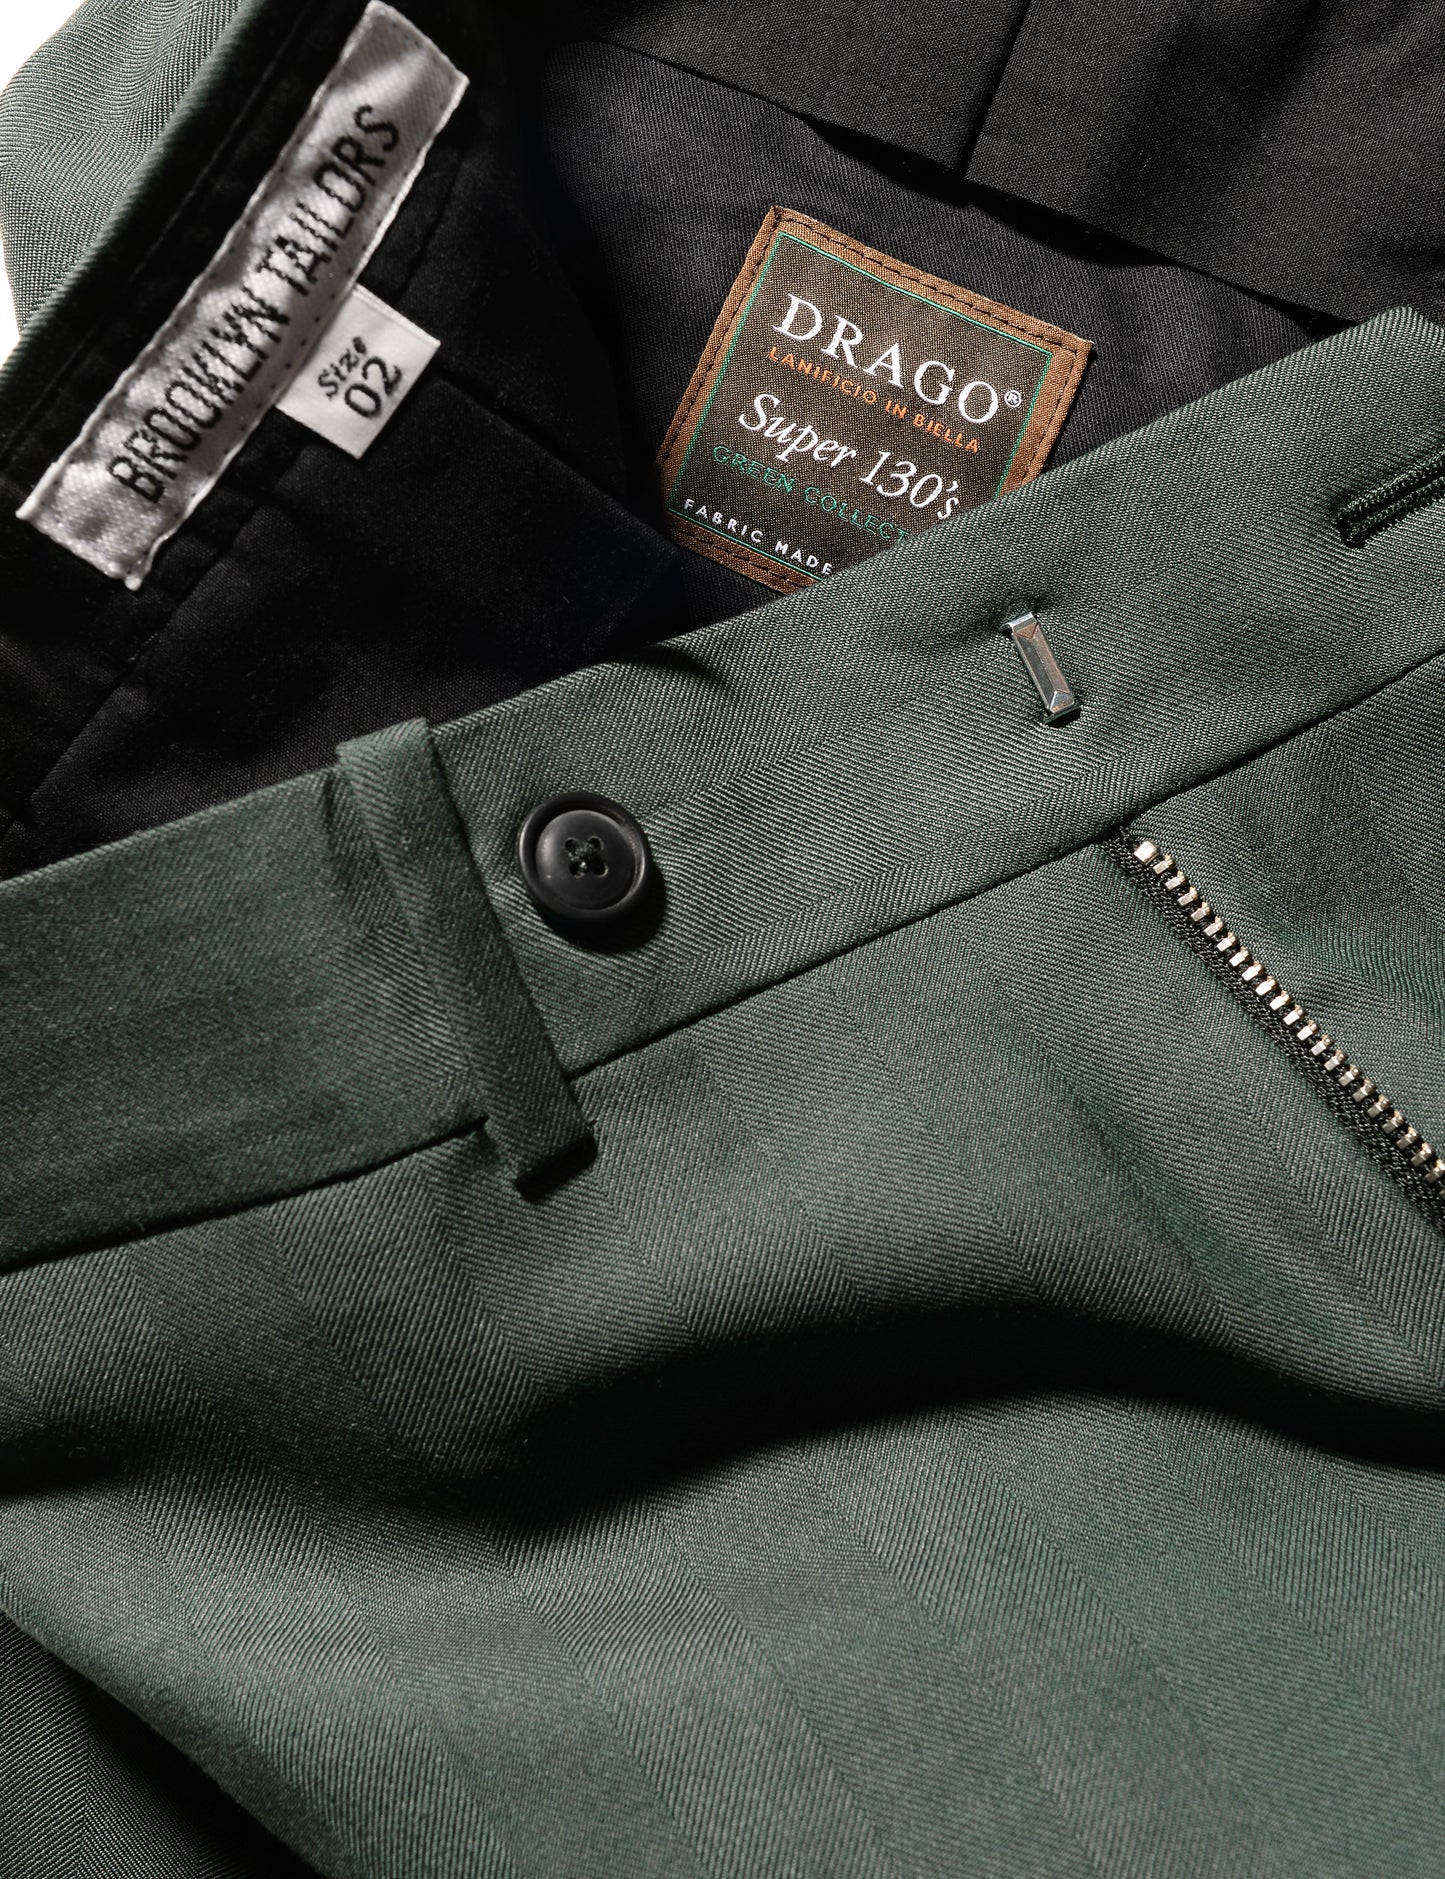 Detail of BKT50 Tailored Trousers in Wool Herringbone - Cyprus showing fabric pattern, waist, and interior labels